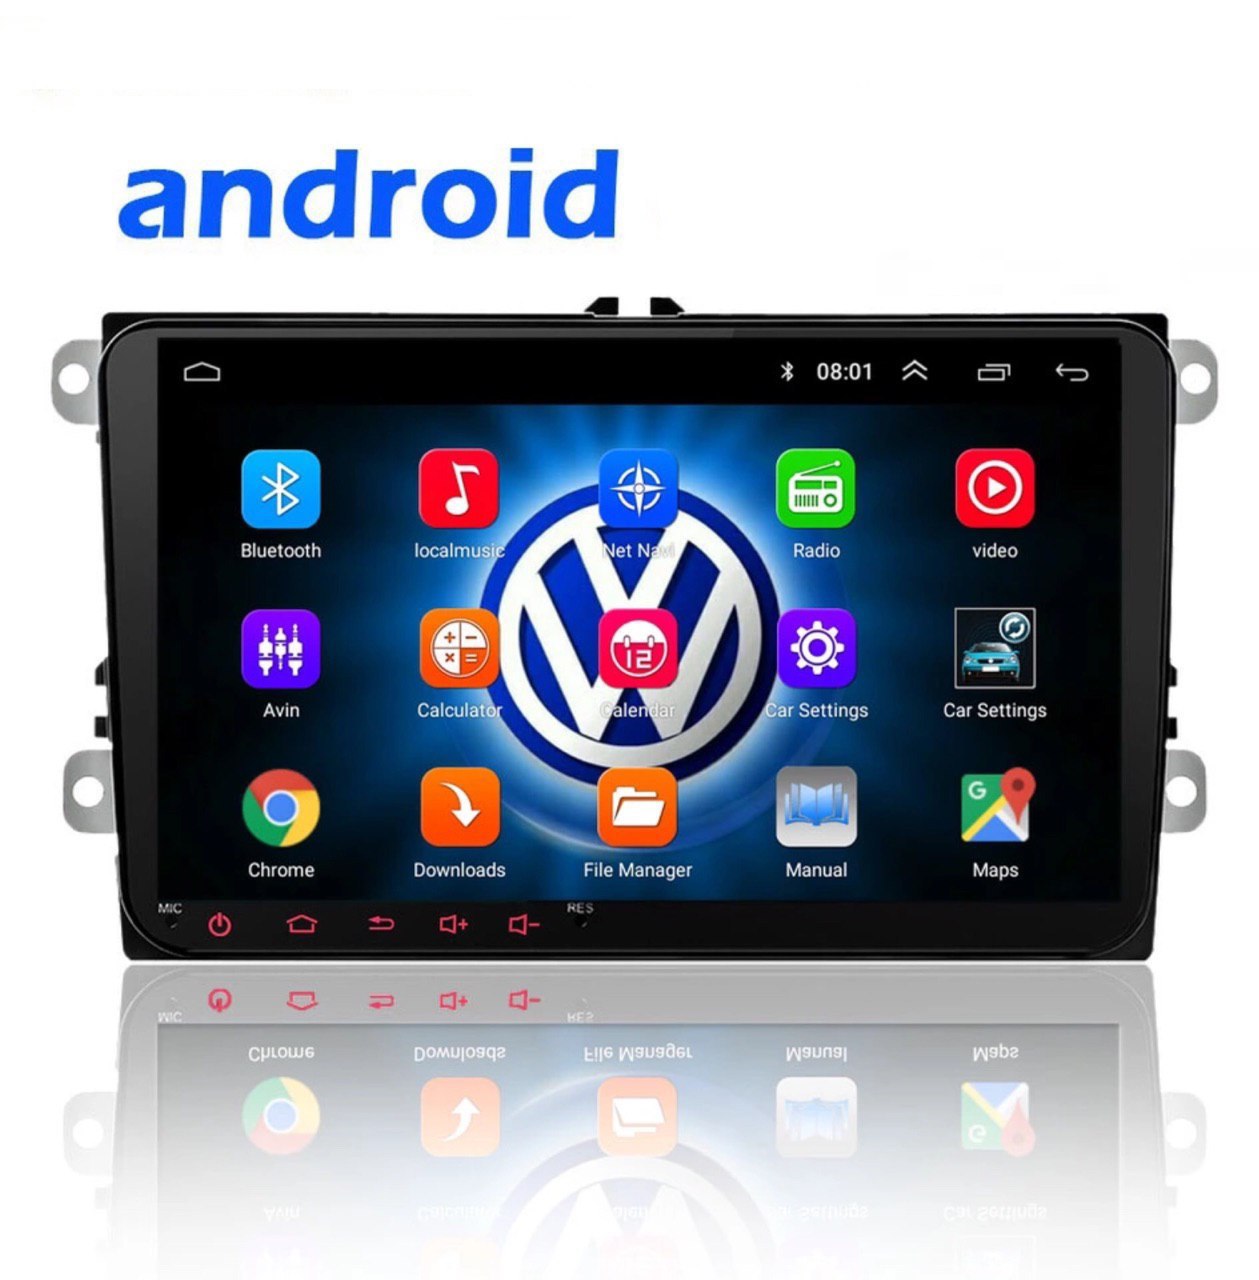 Car Stereo for VW Golf, Passat, Tiguan, Polo, Android 8.1 Double DIN Head Unit for Volkswagen, Bluetooth, Radio, Video Player